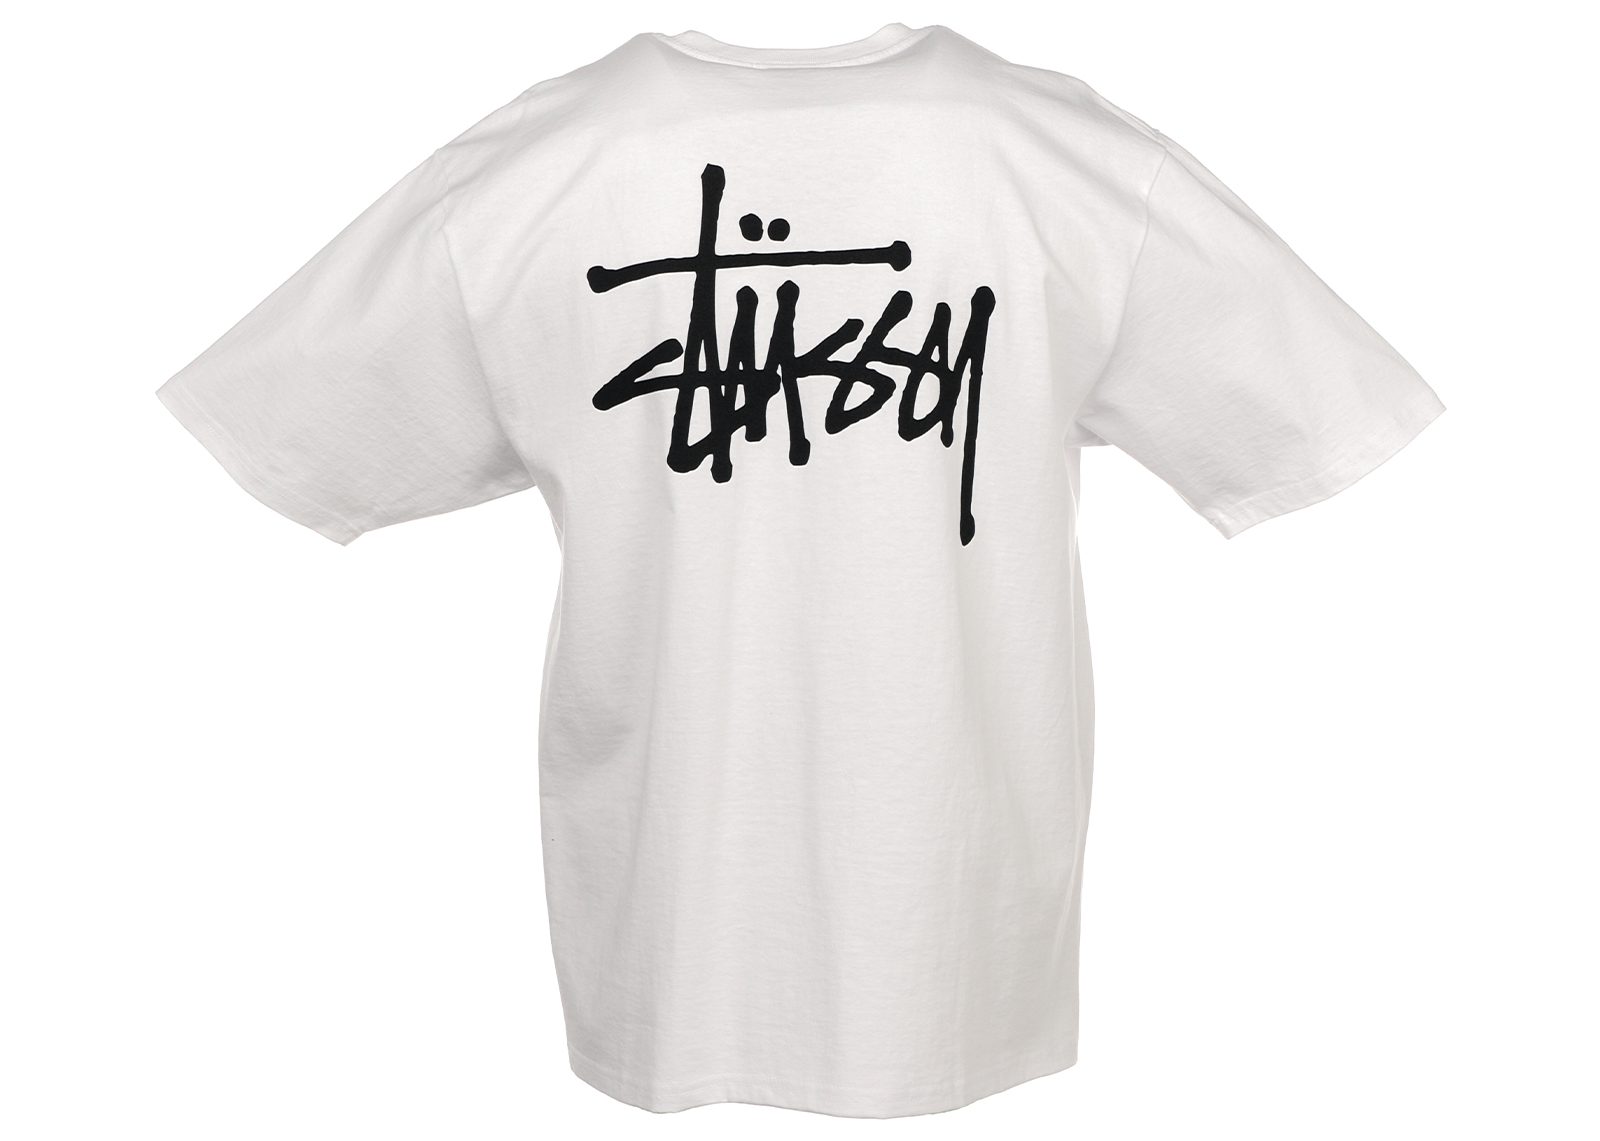 Buy Stussy T-Shirts, Hoodies and More